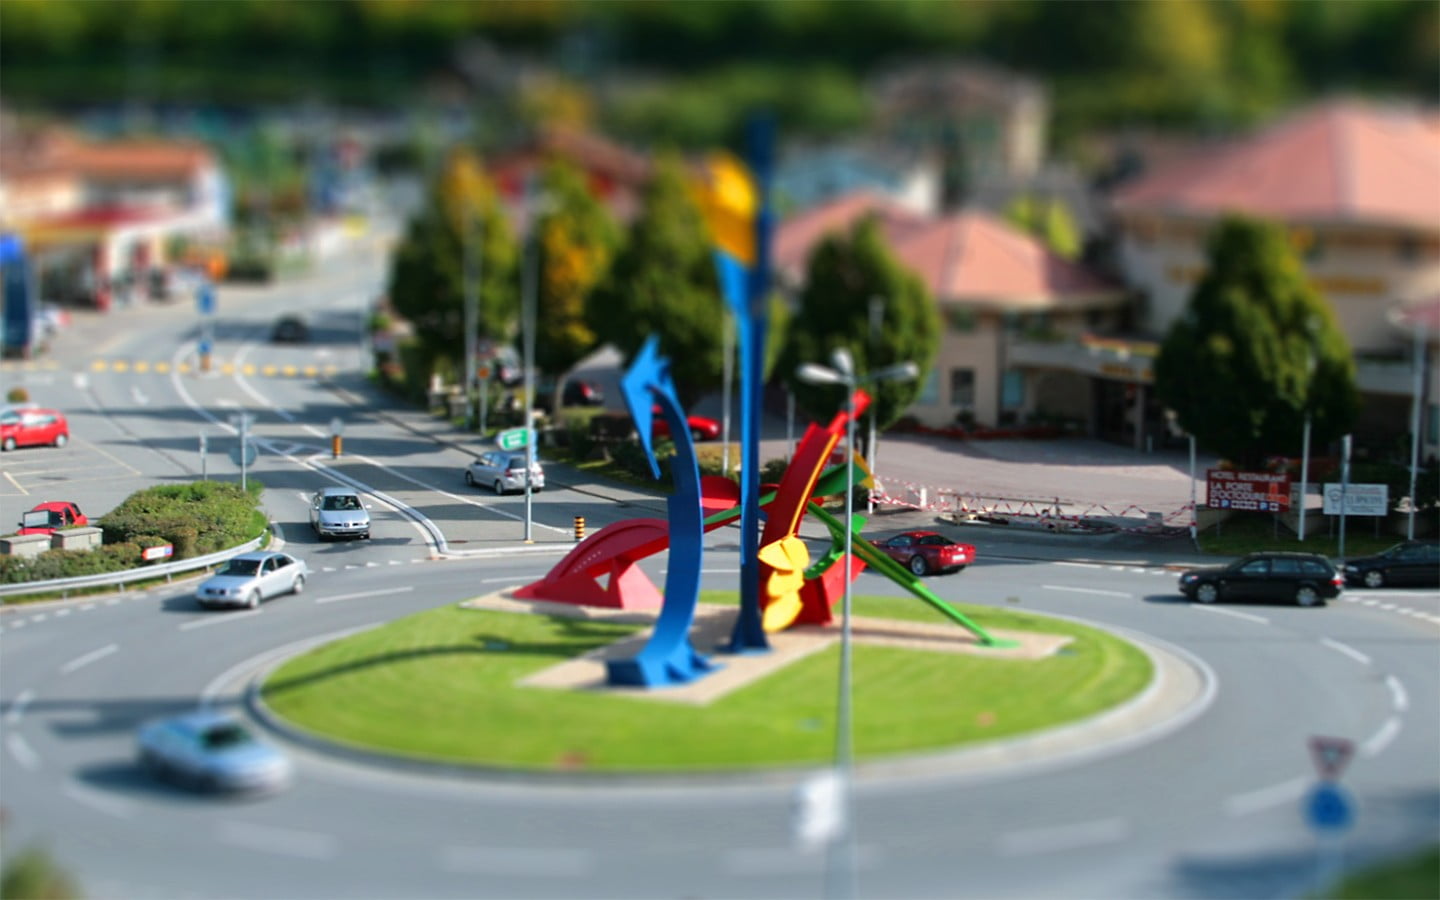 city tilt shift photo, multicolored diorama of round about with cars and house